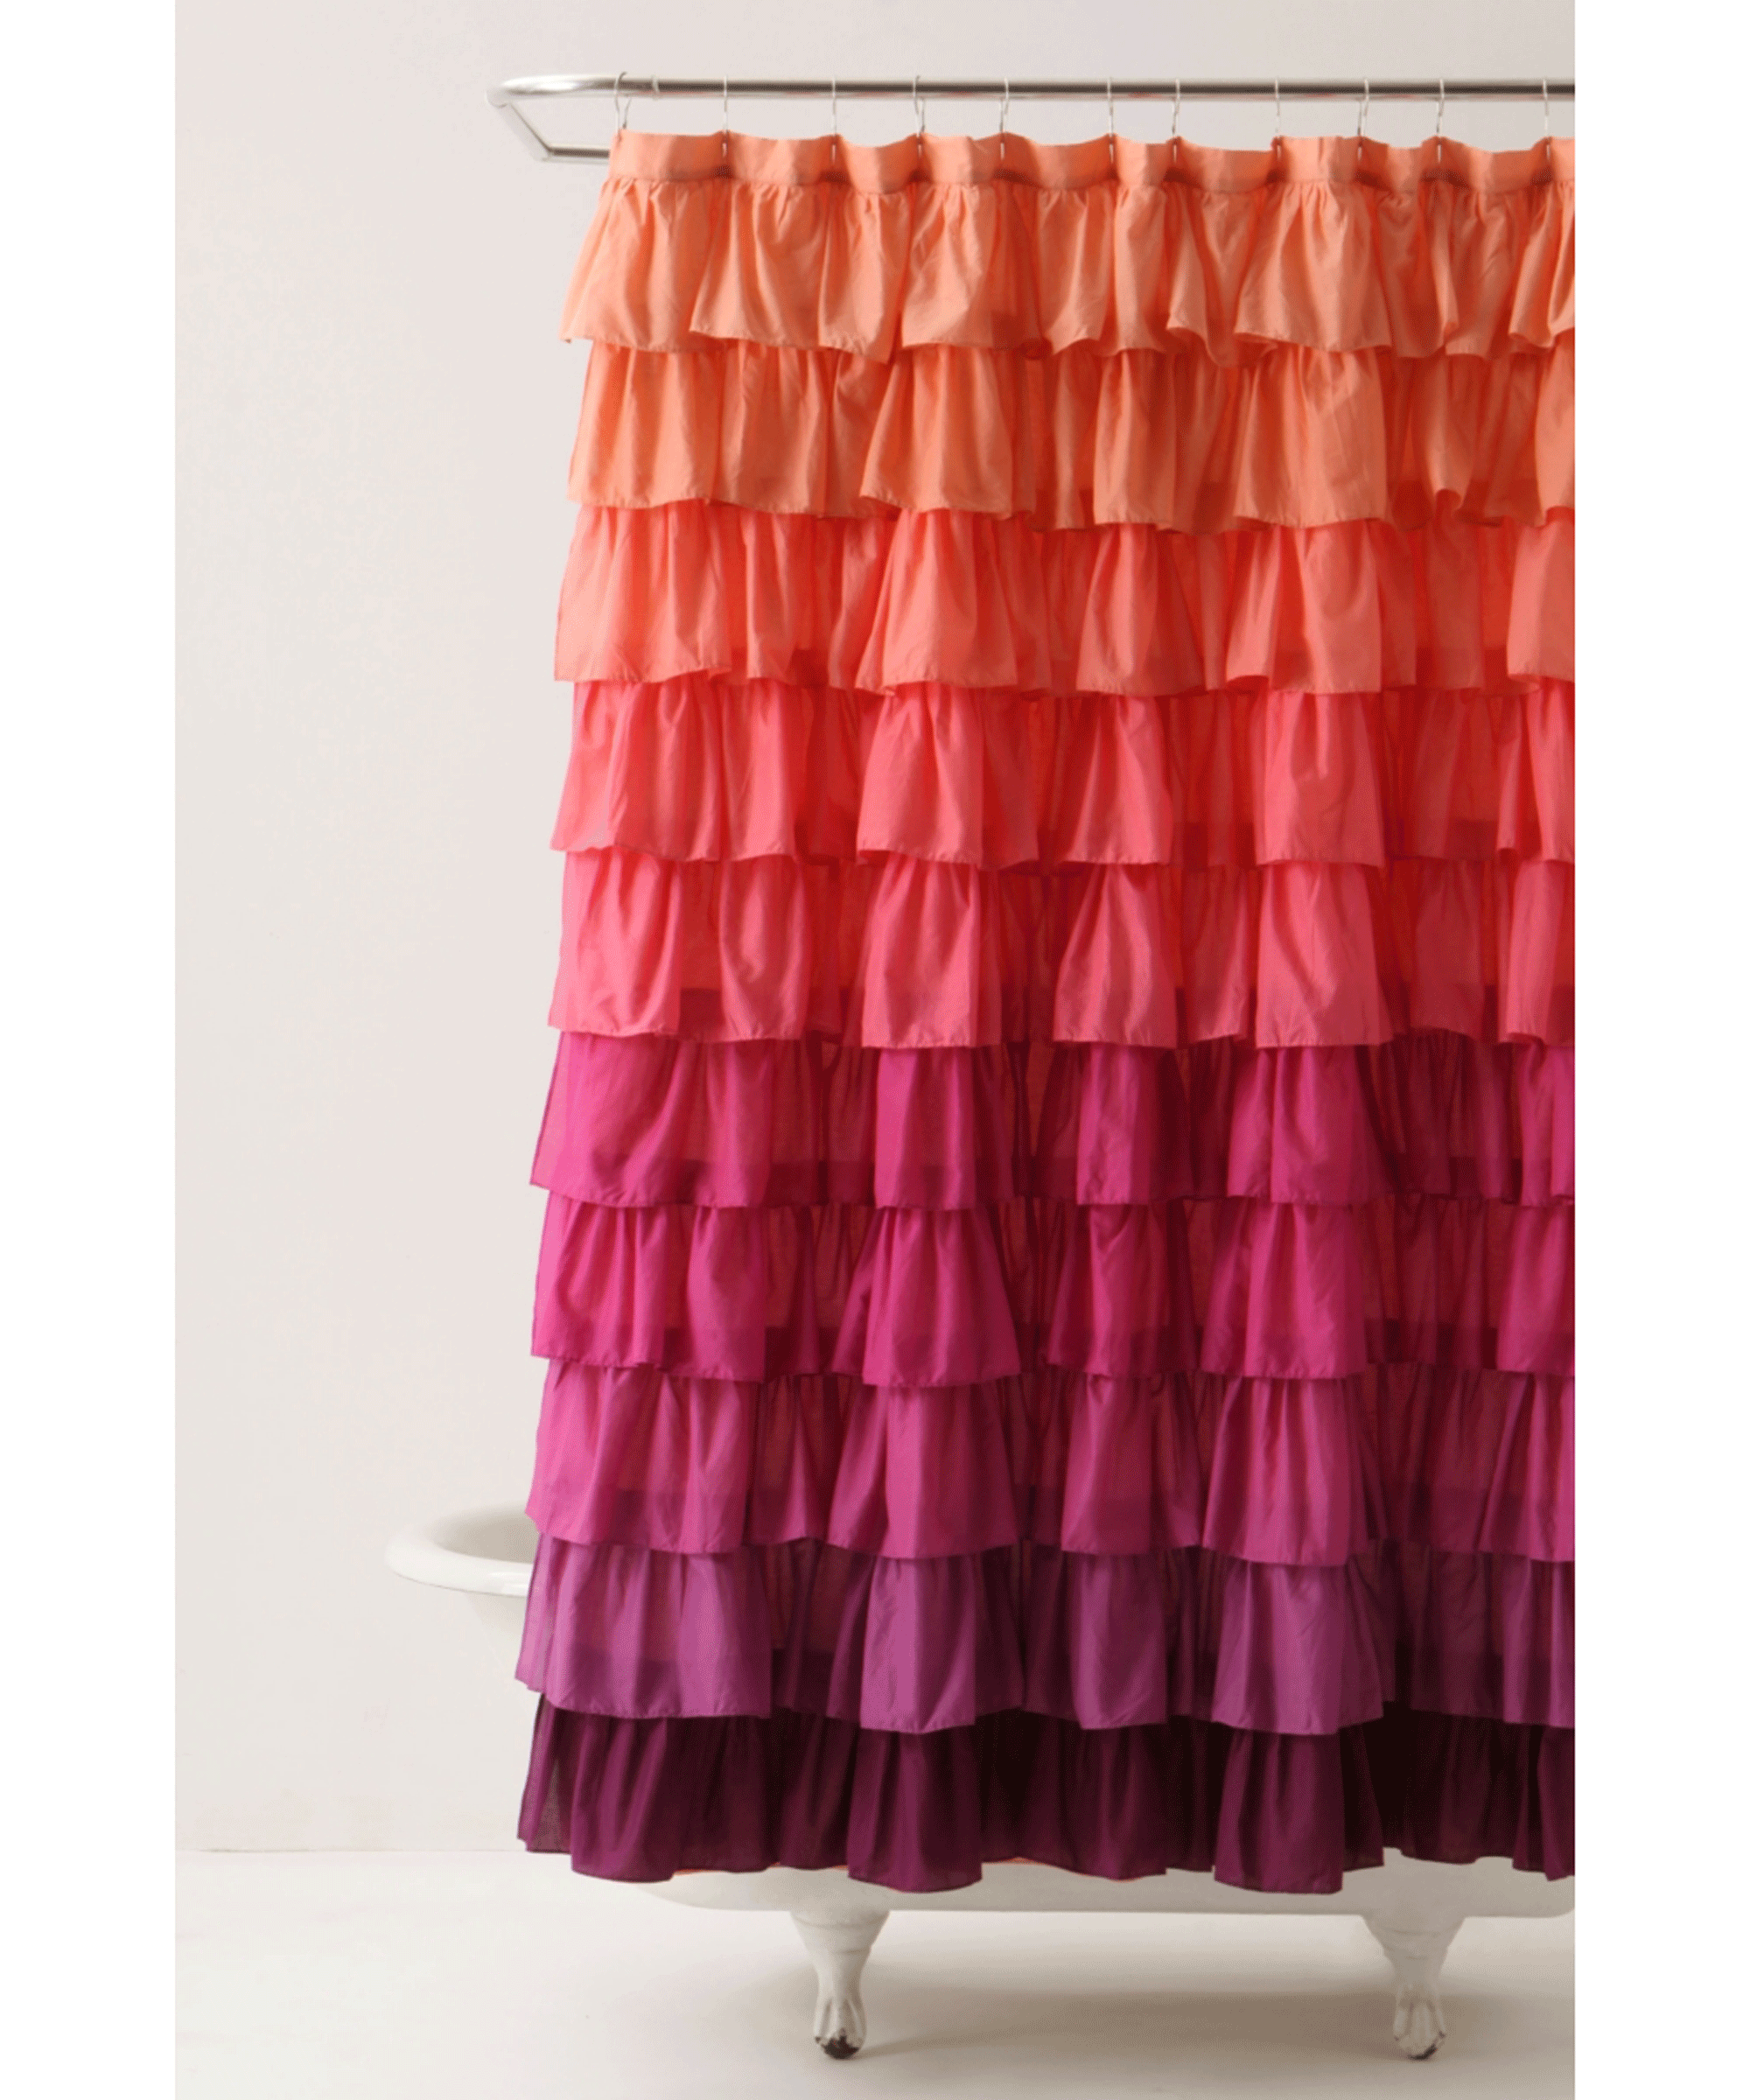 Frilly ombre shower curtain in shades of orange and pink over bath